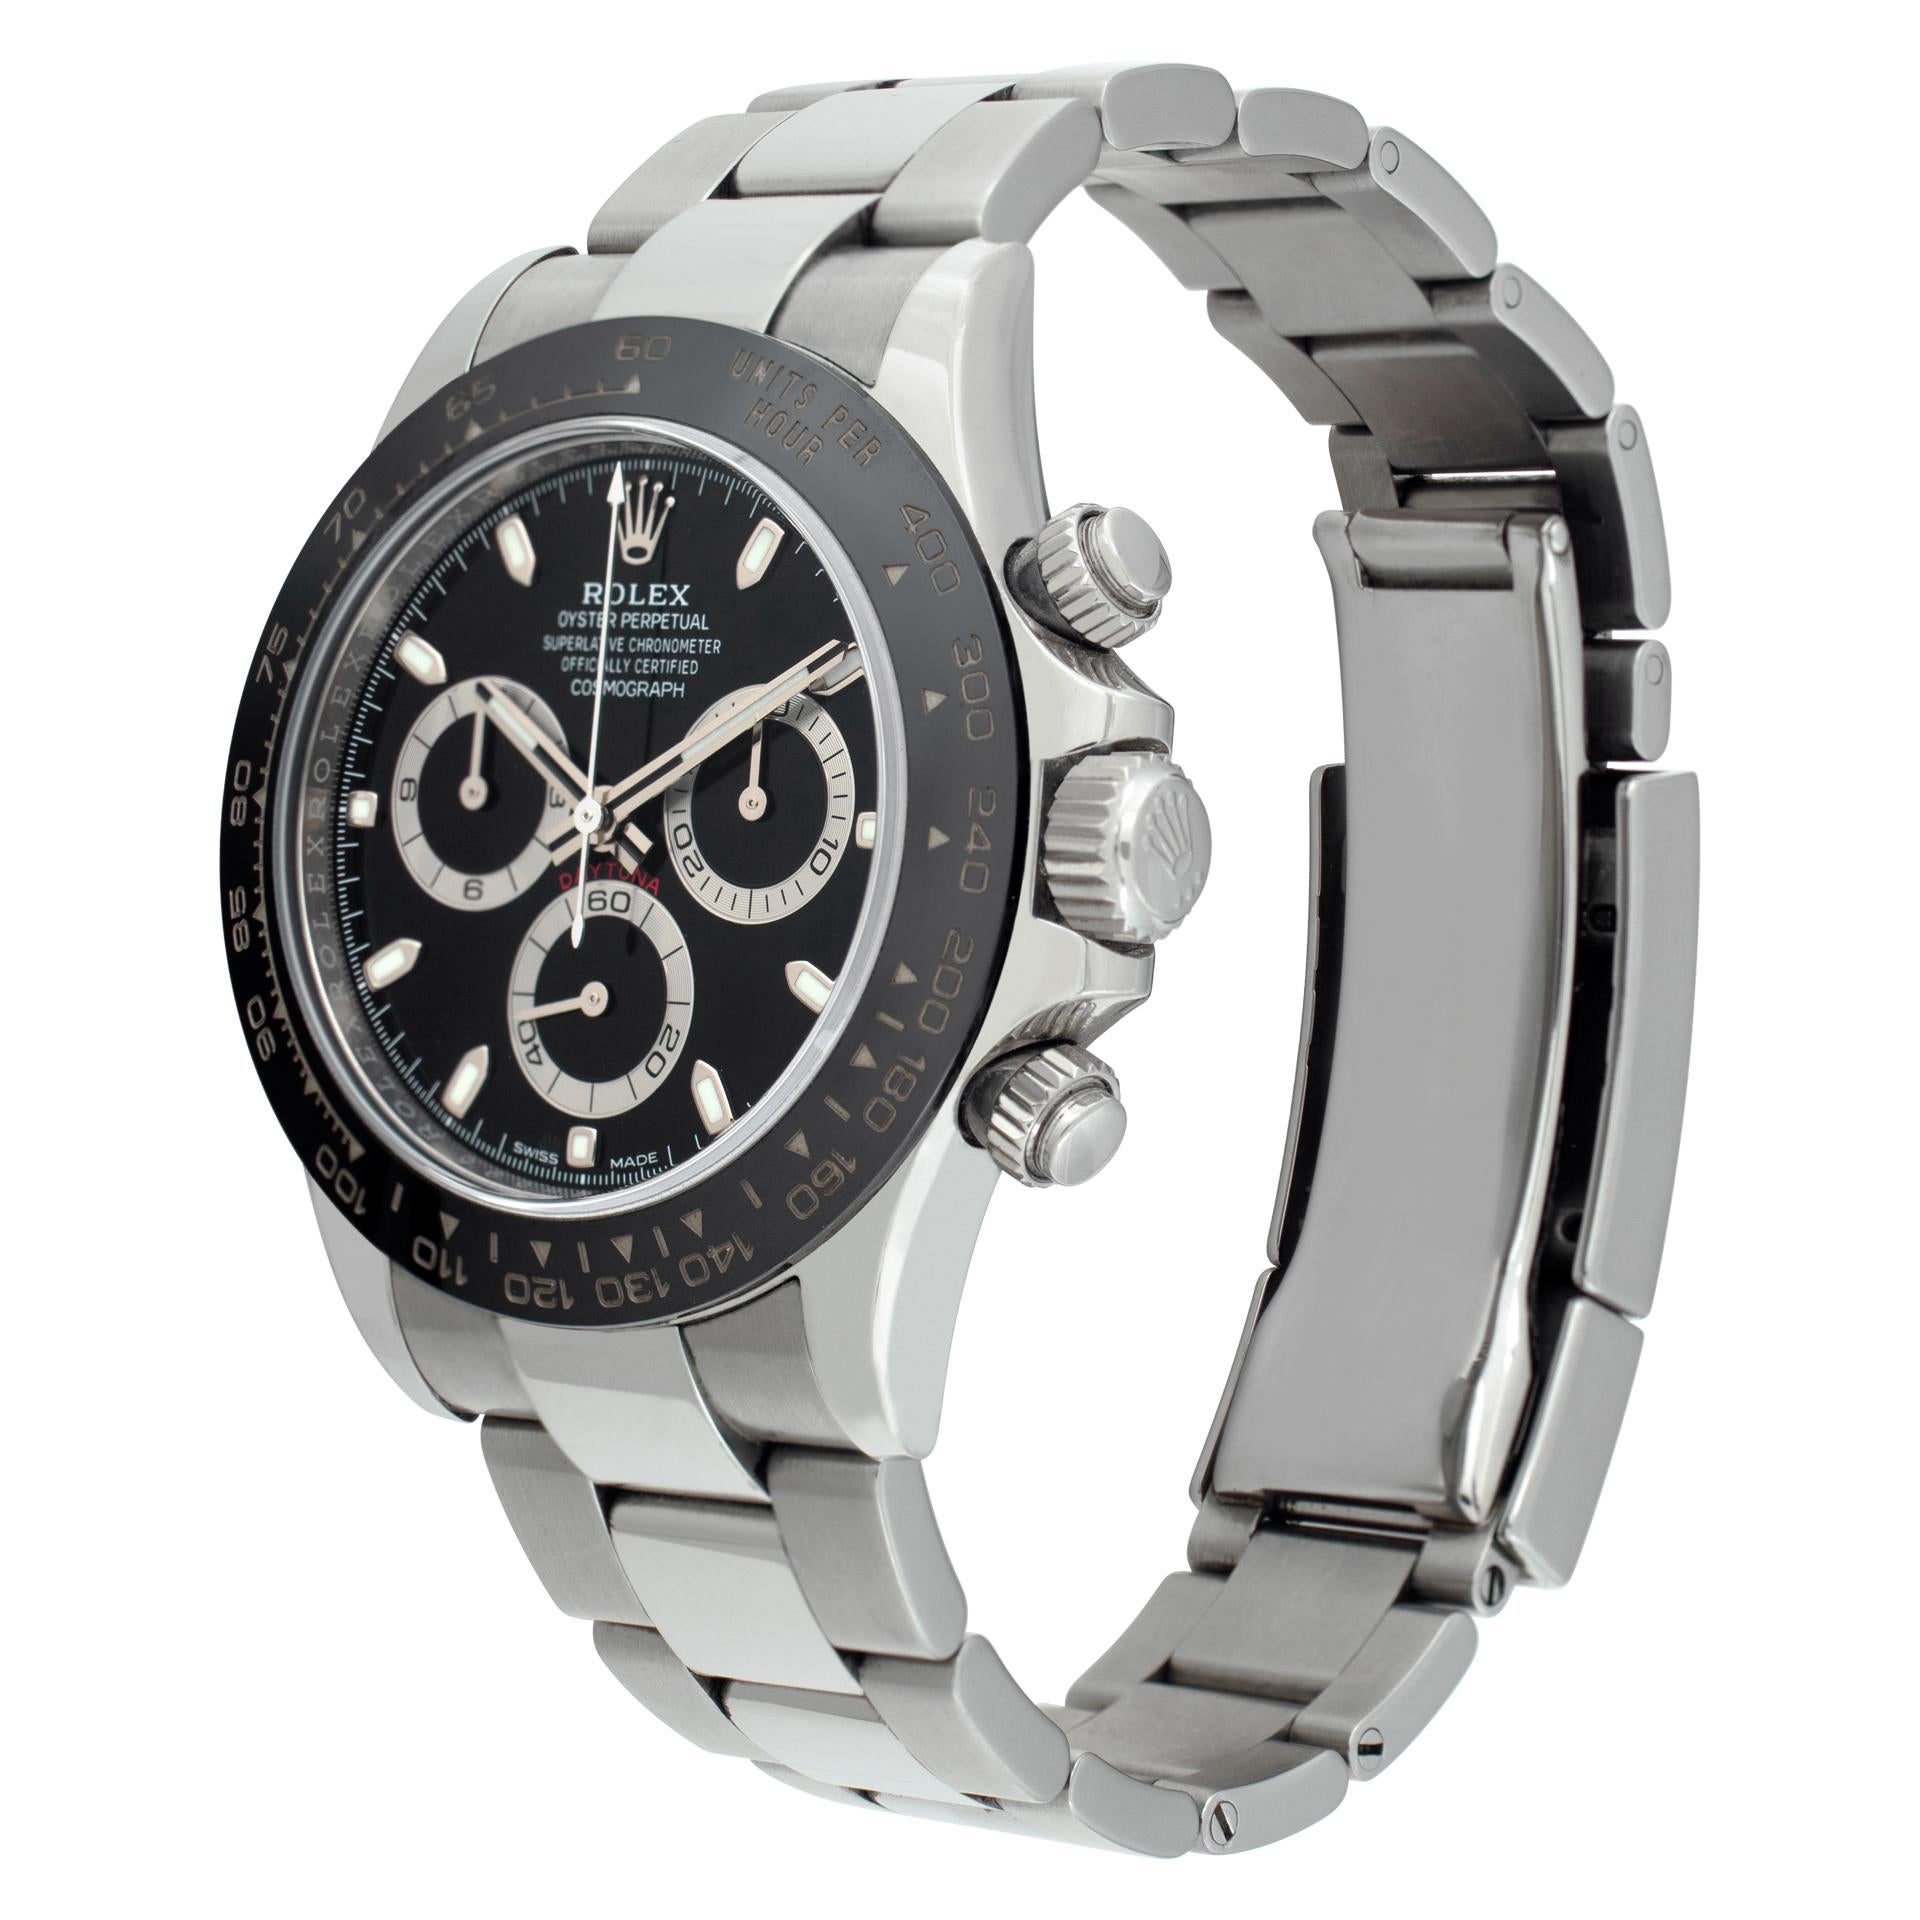 Rolex Daytona with black ceramic bezel  in stainless steel.  Auto w/ subseconds and chronograph. 40 mm case size. **Bank wire only at this price** Ref 116500LN. Circa 2010s. Fine Pre-owned Rolex Watch. Certified preowned Sport Rolex Daytona 116500LN